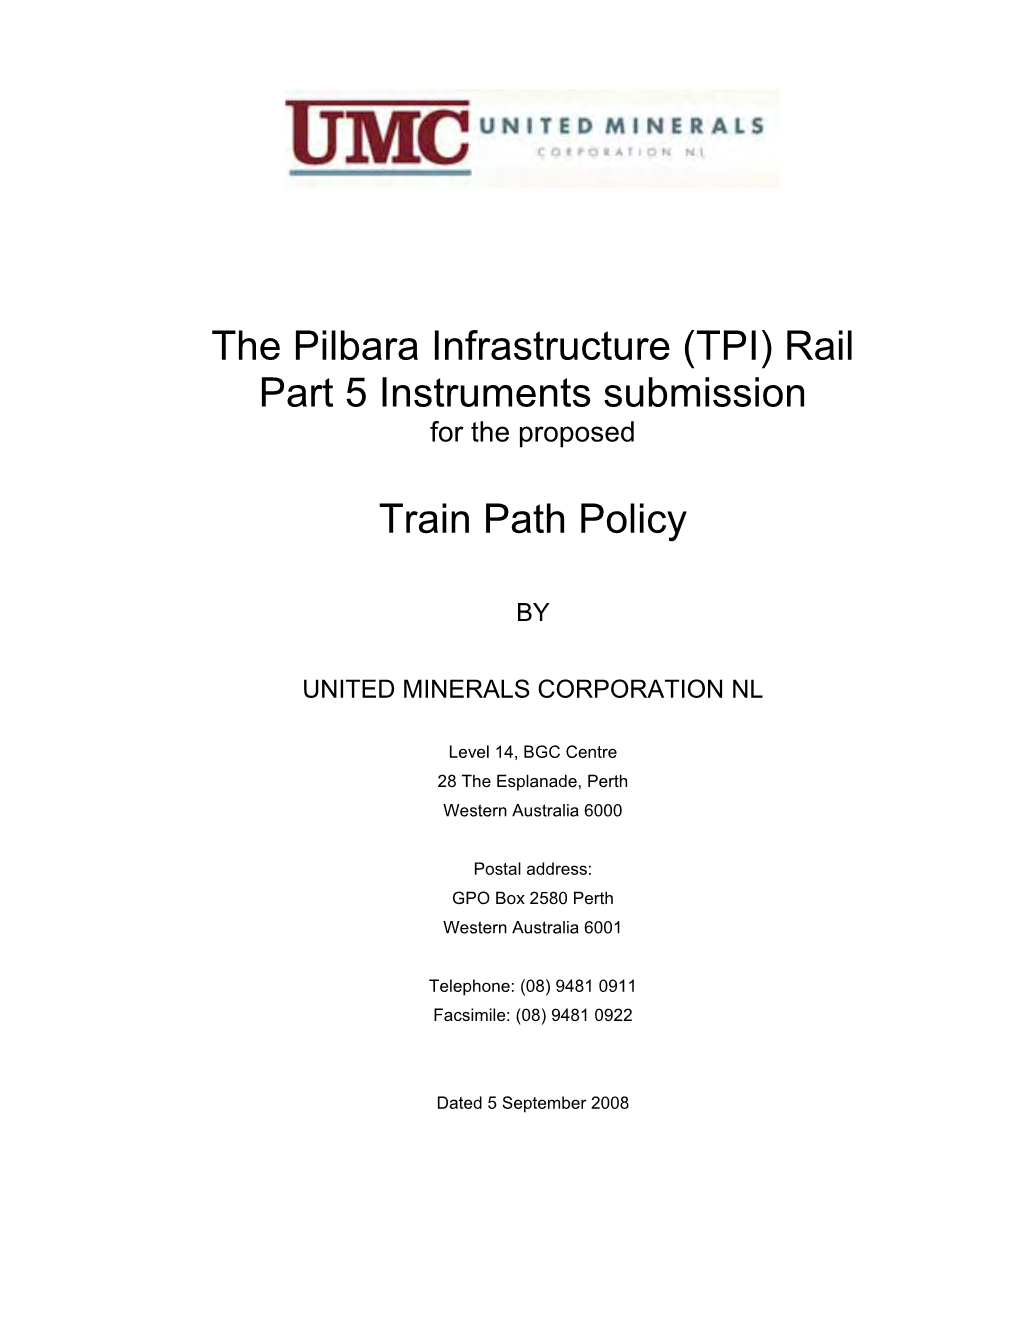 Rail Part 5 Instruments Submission Train Path Policy